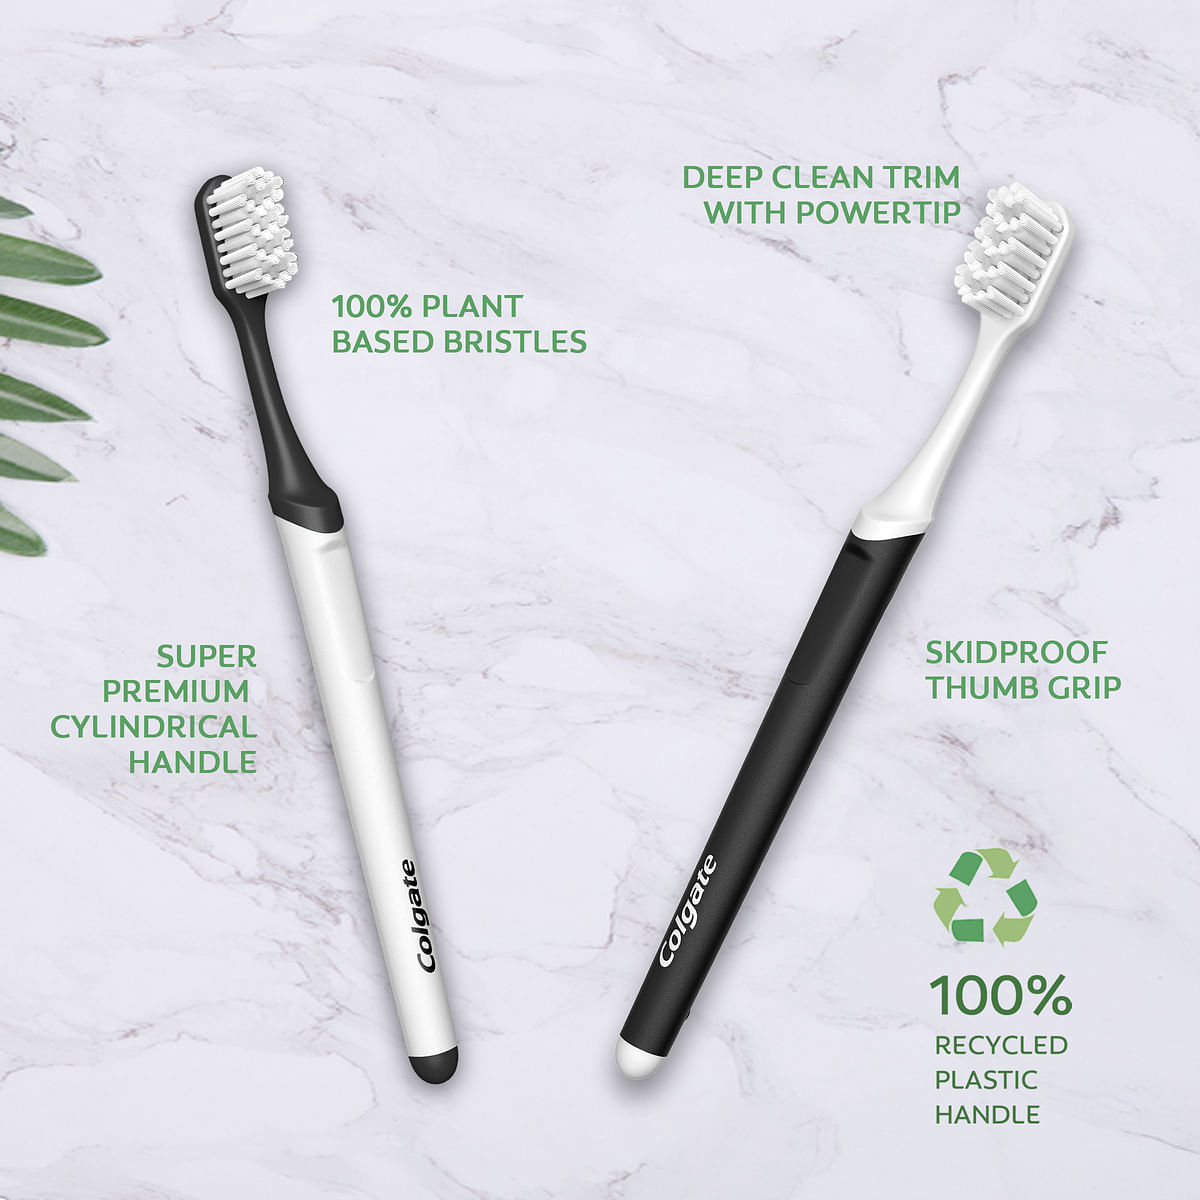 Colgate India has launched a 100% recycled plastic handle toothbrush